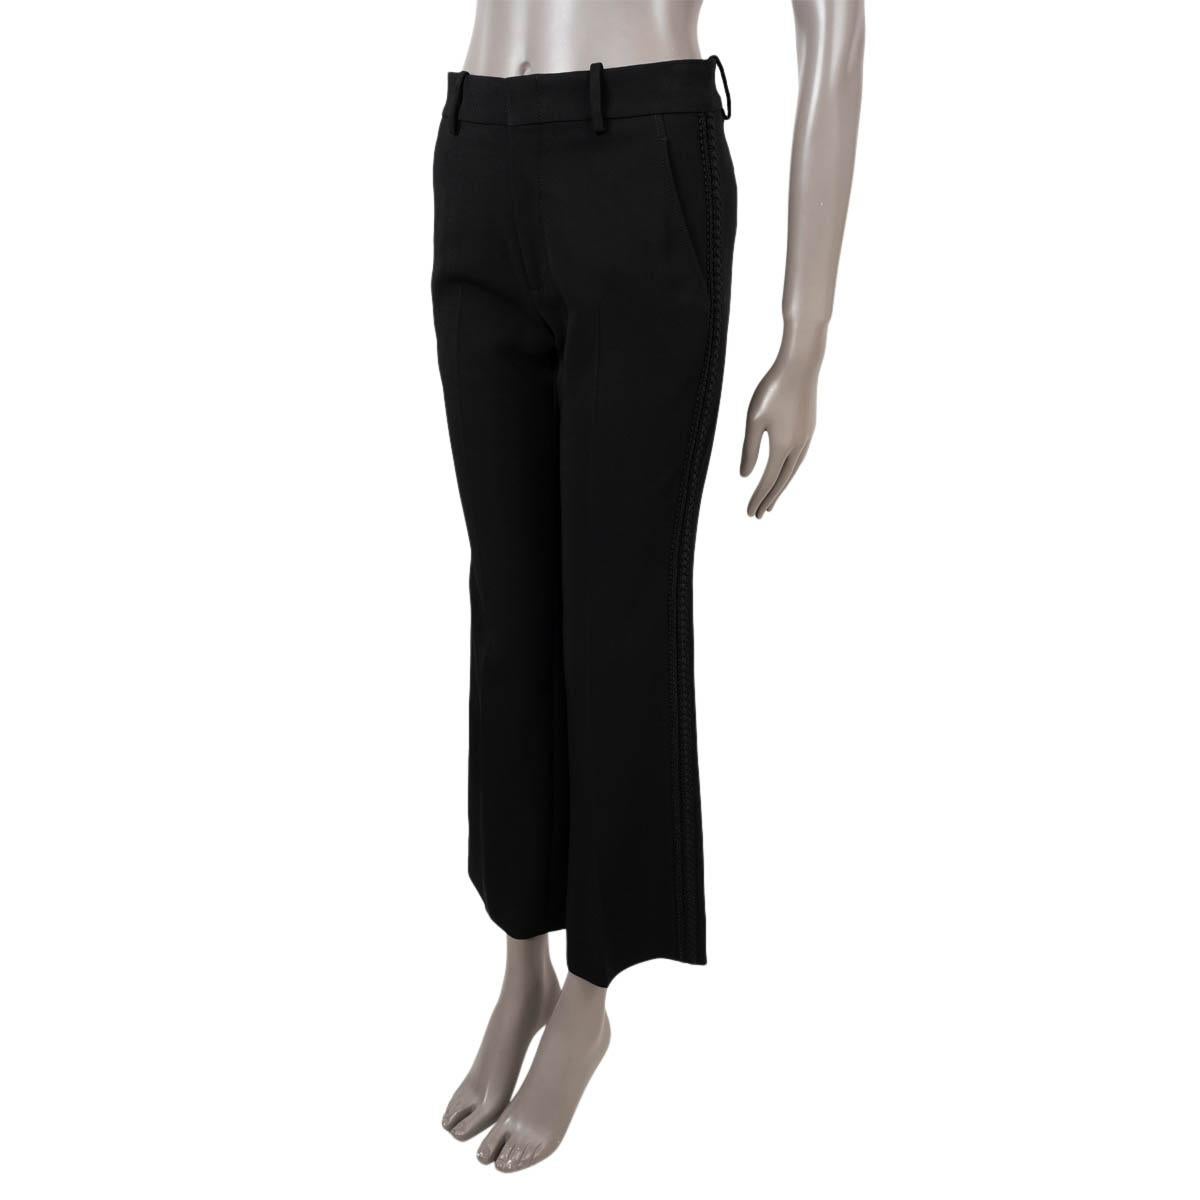 100% authentic Gucci passementerie trim stretch cady pants in black acetate (69%), cotton (19%) and polyester (8%). Feature a flared, cropped leg, belt loops and two slit pockets on the sides and two slit pockets on the back. Open with one hook and